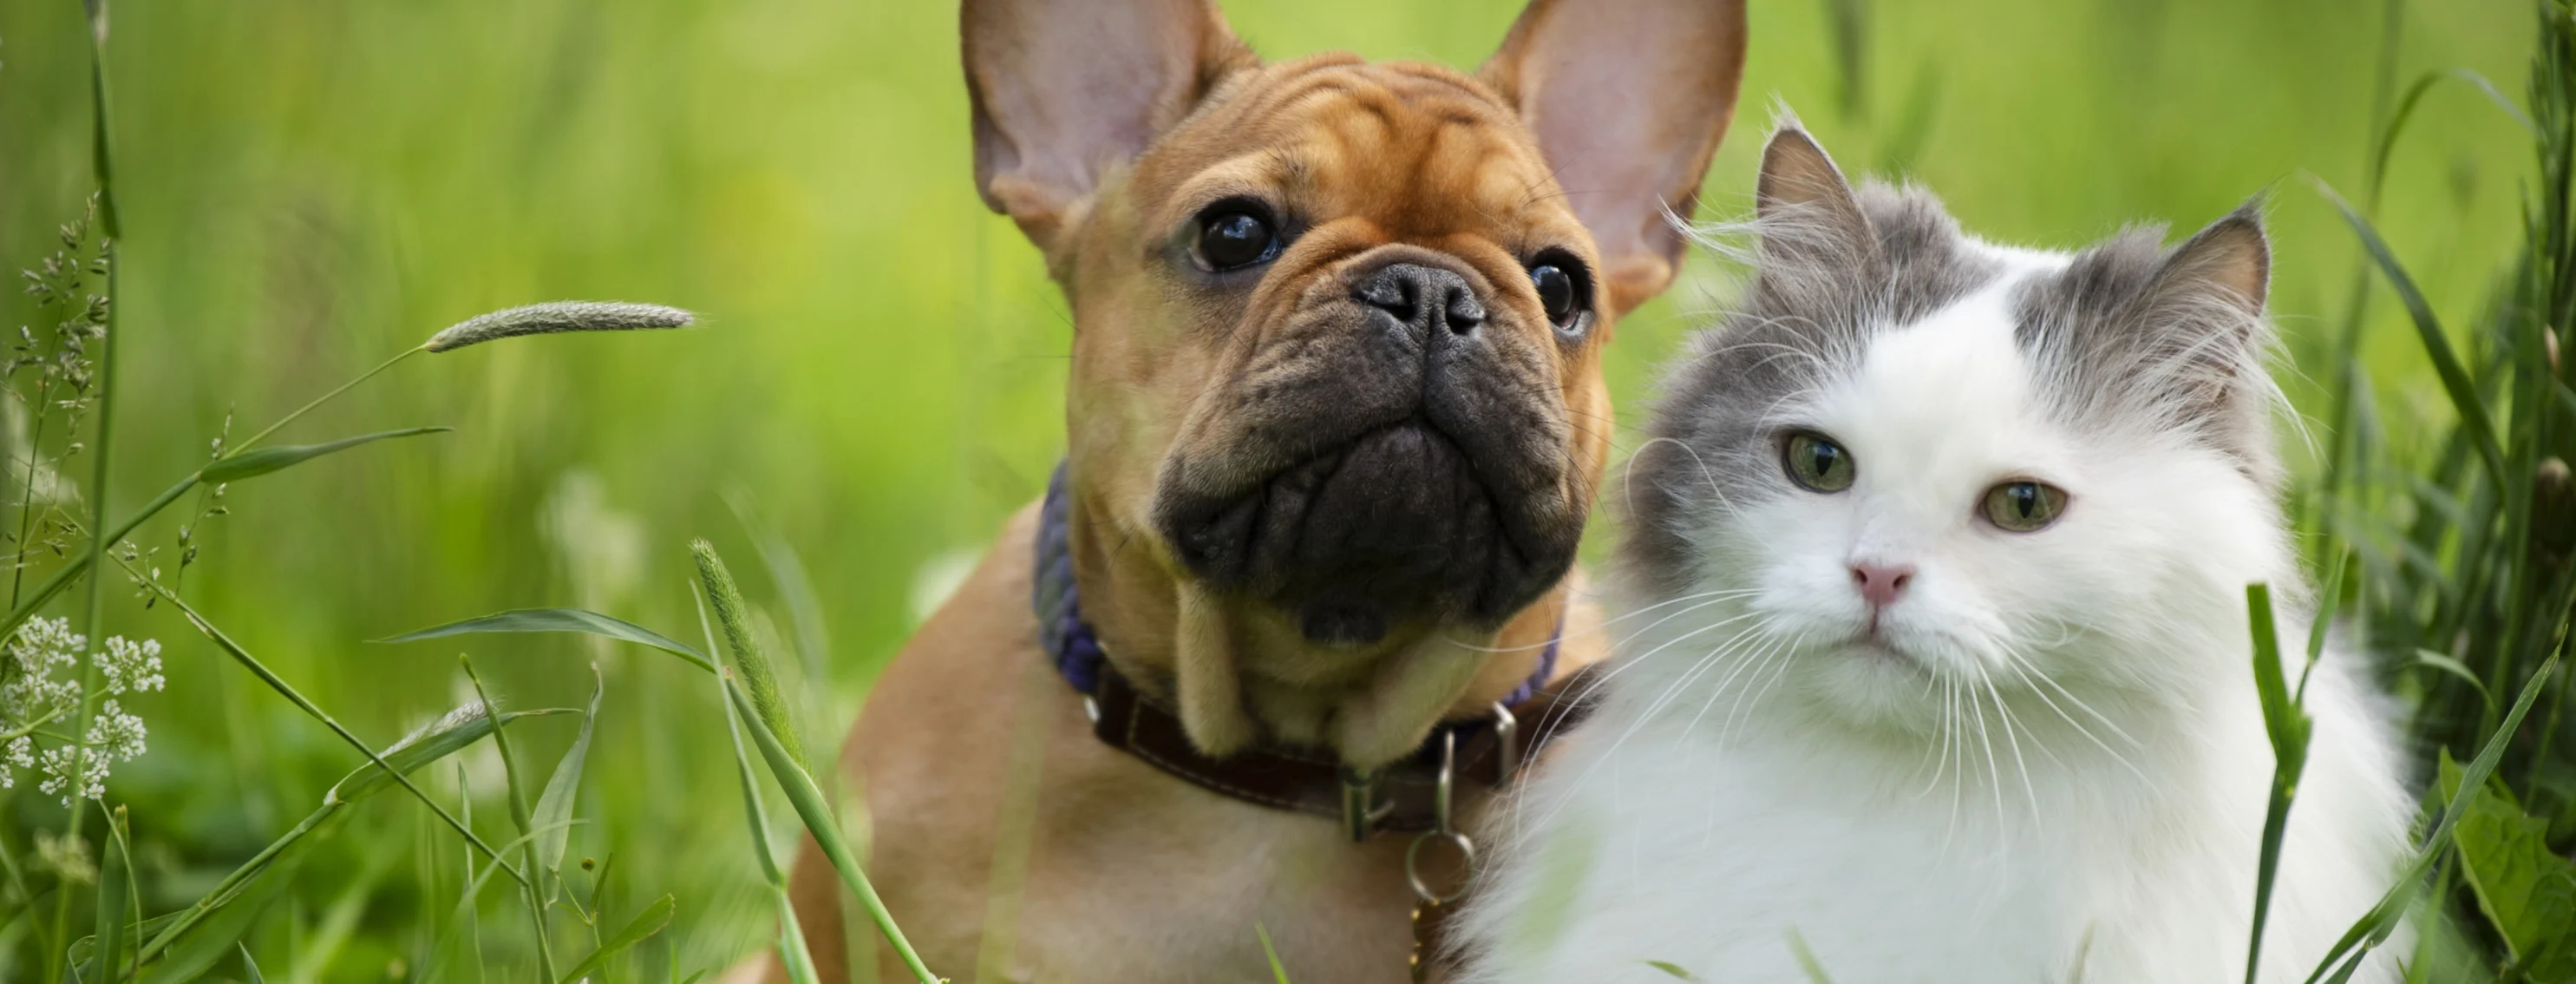  a puppy and kitten in a grass field